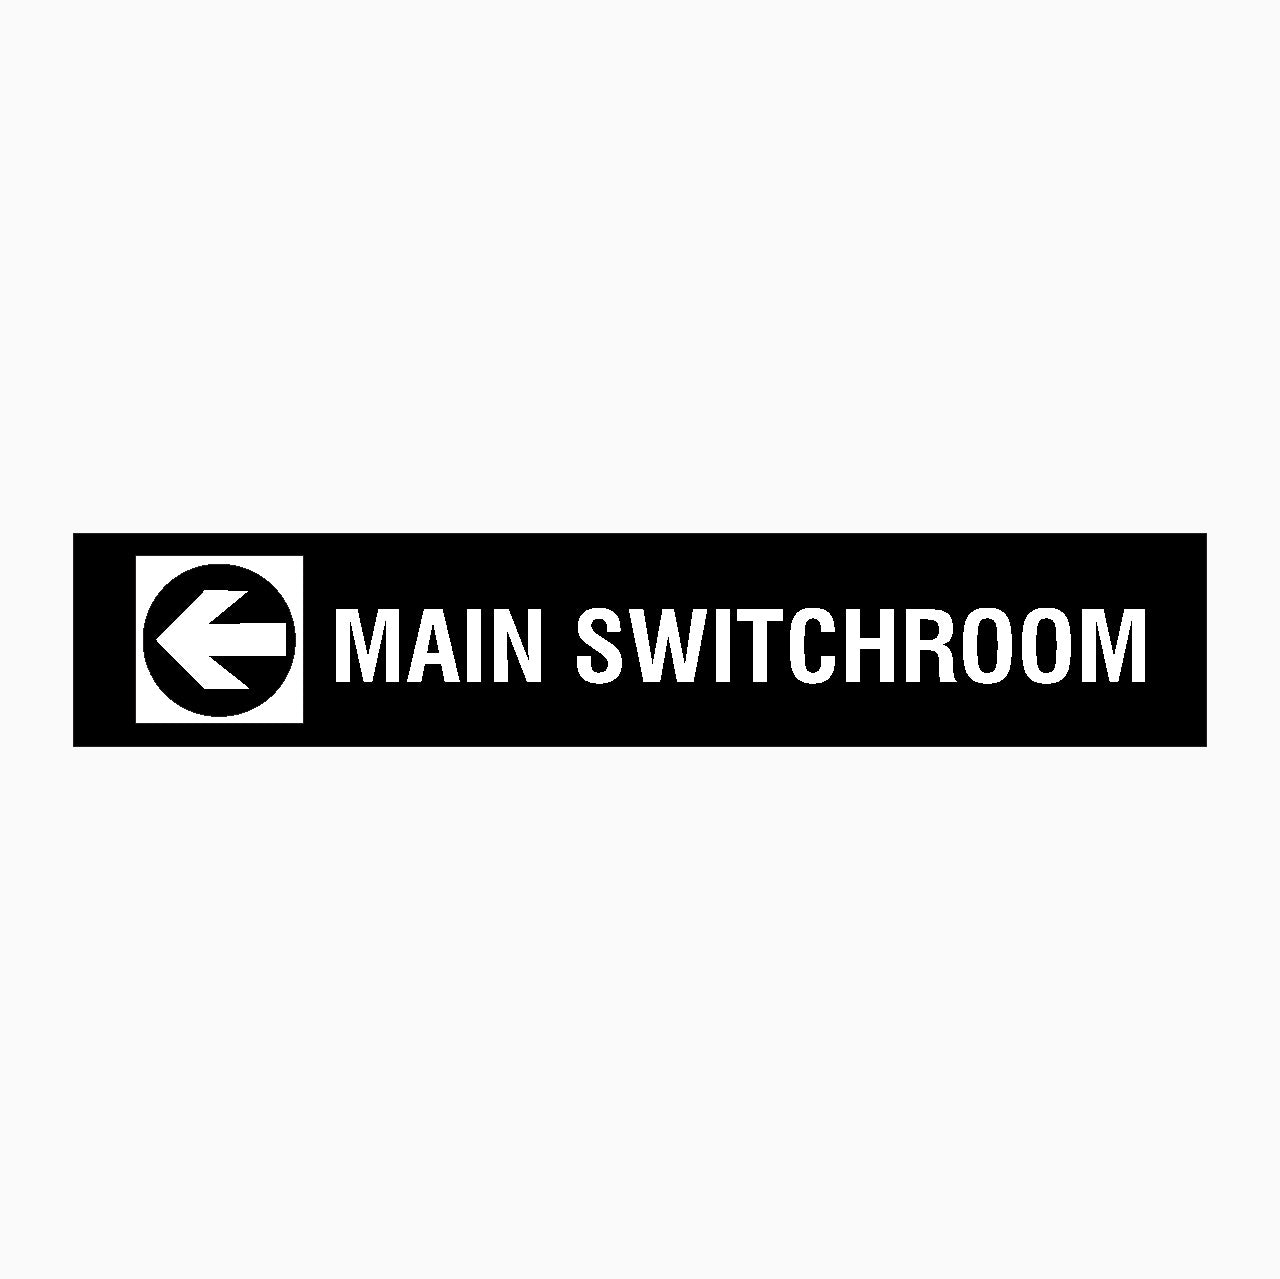 MAIN SWITCH ROOM SIGN - LEFT ARROW SIGN